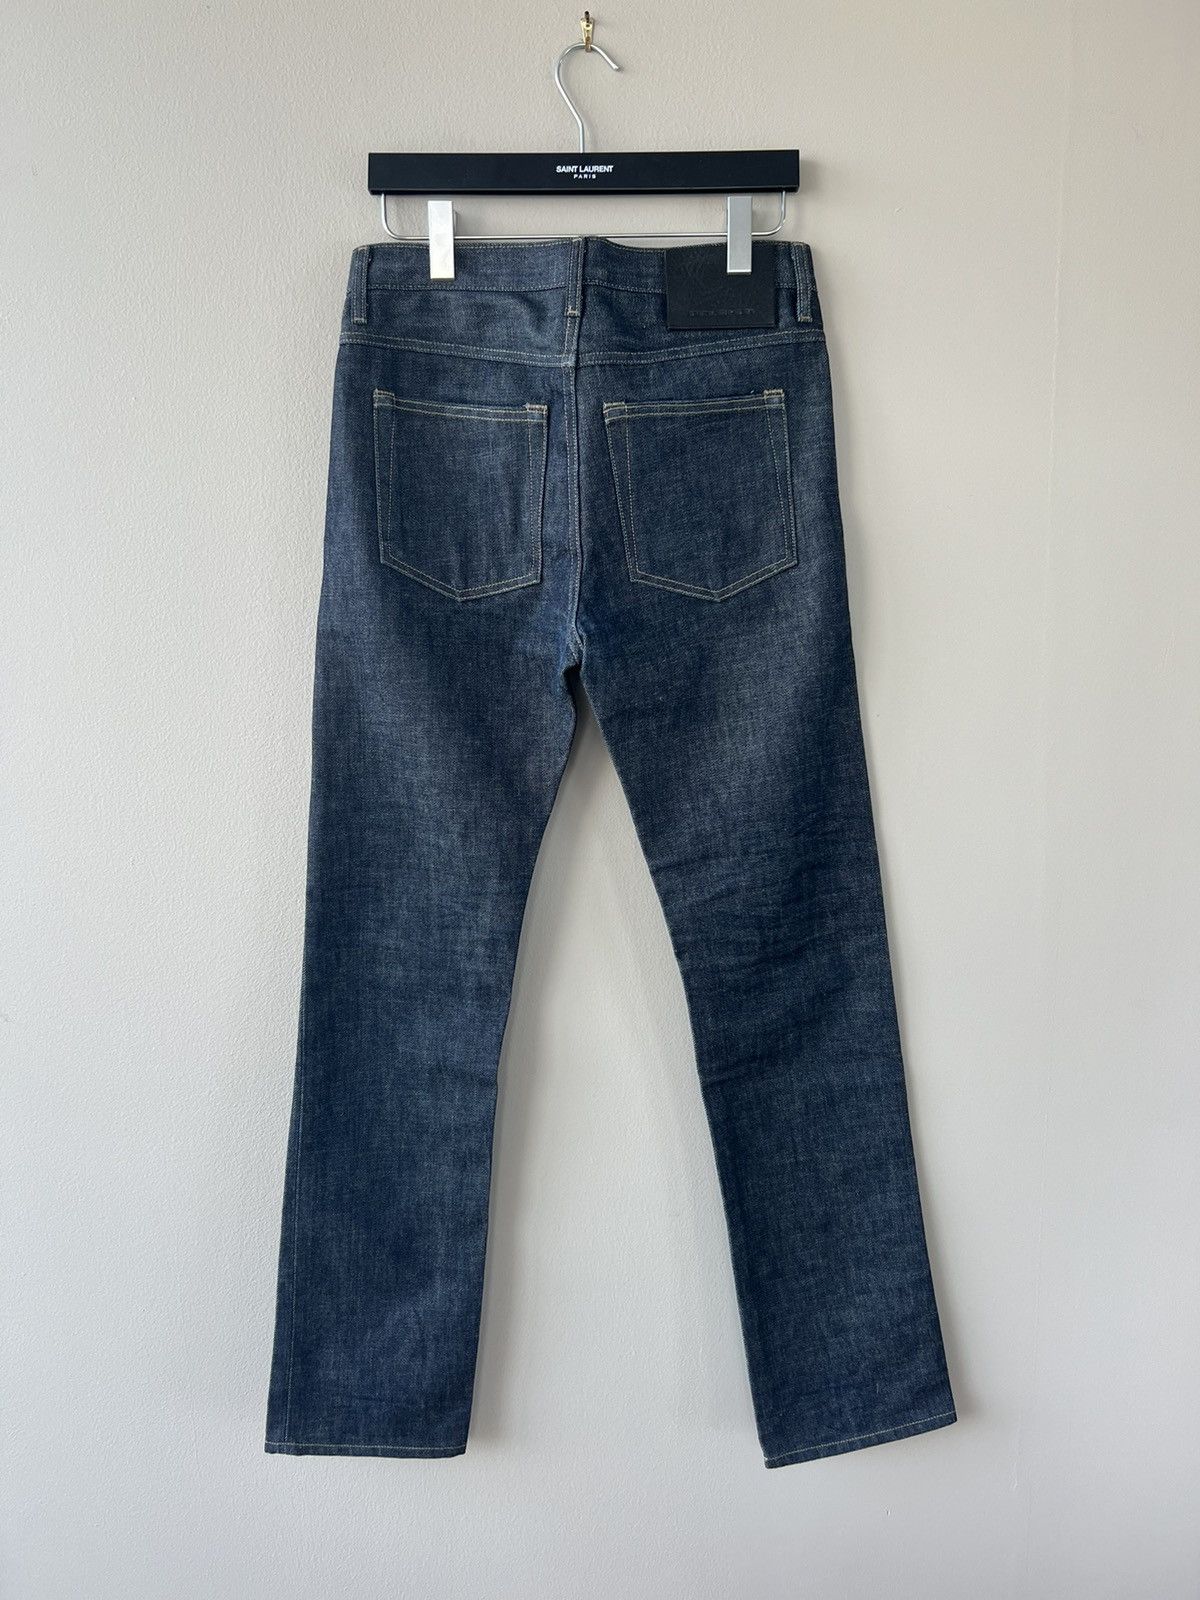 Selvedge Torrence Cut Made in Los Angeles Denim - 3